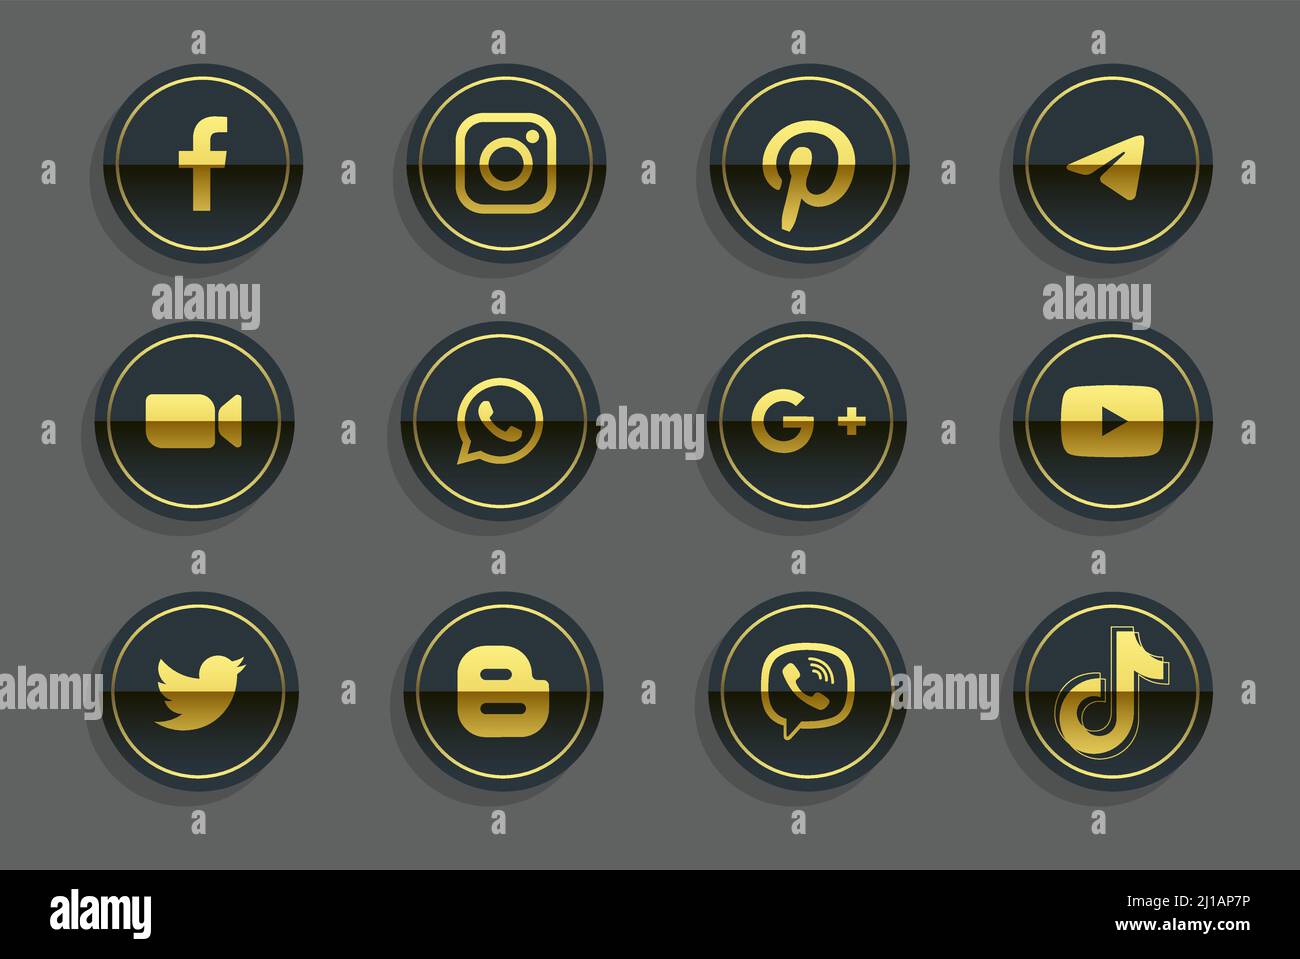 Kiev, Ukraine - July 03, 2021: Set of golden circle popular Social Media icons: Facebook, Instagram, Twitter, Youtube, WhatsApp and others. Vector ill Stock Vector